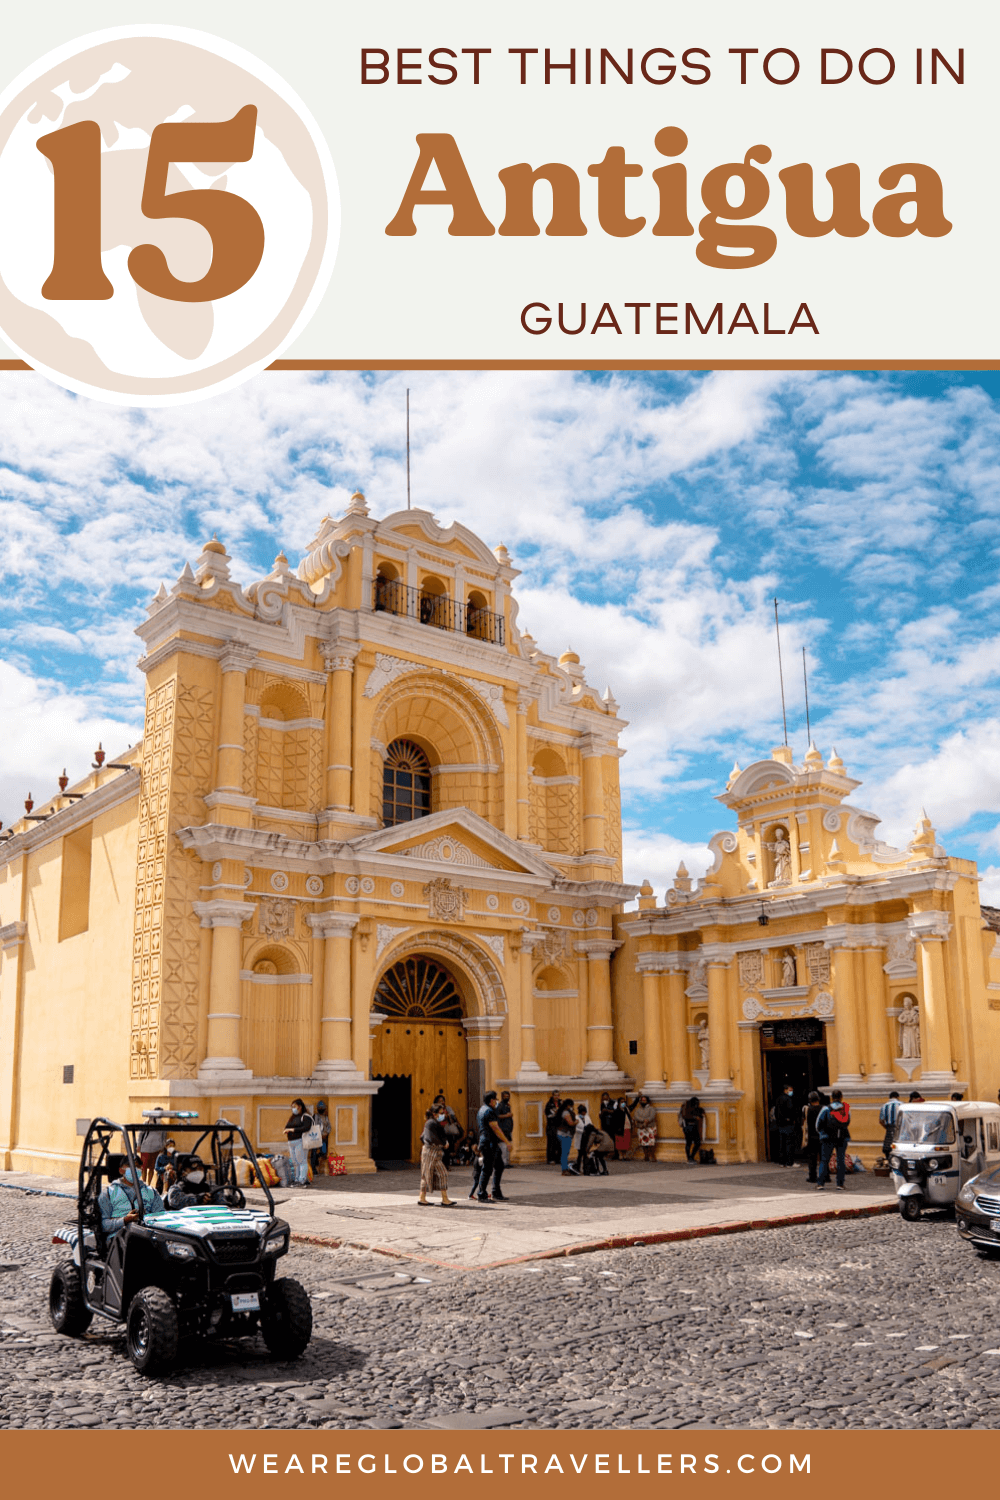 The best things to do in Antigua, Guatemala